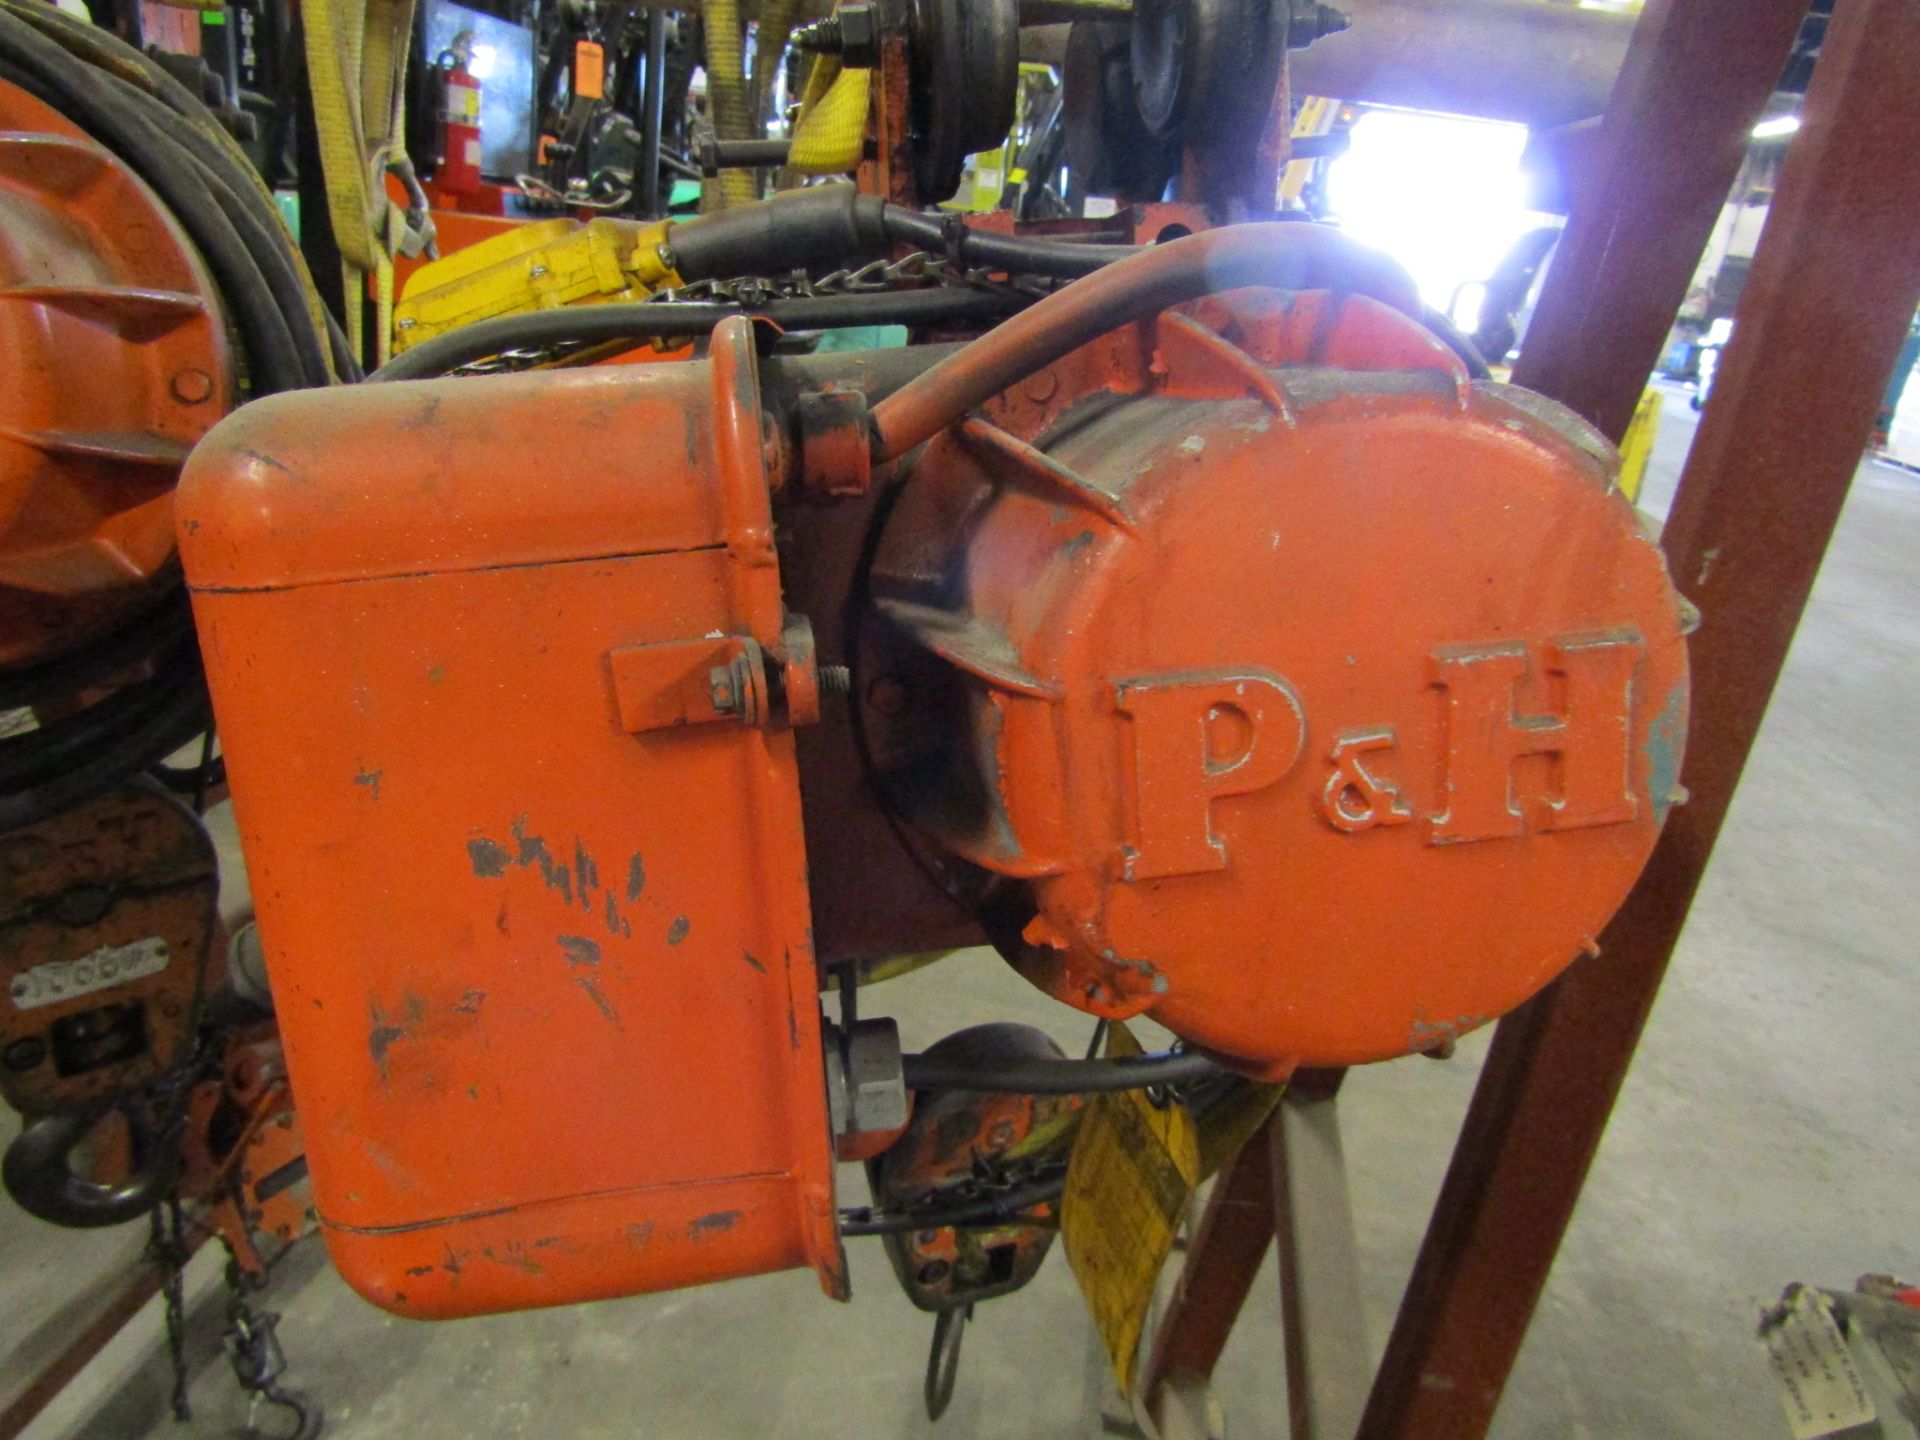 P&H Electric 1/2 Ton Chain Hoist with pendant controller and trolley